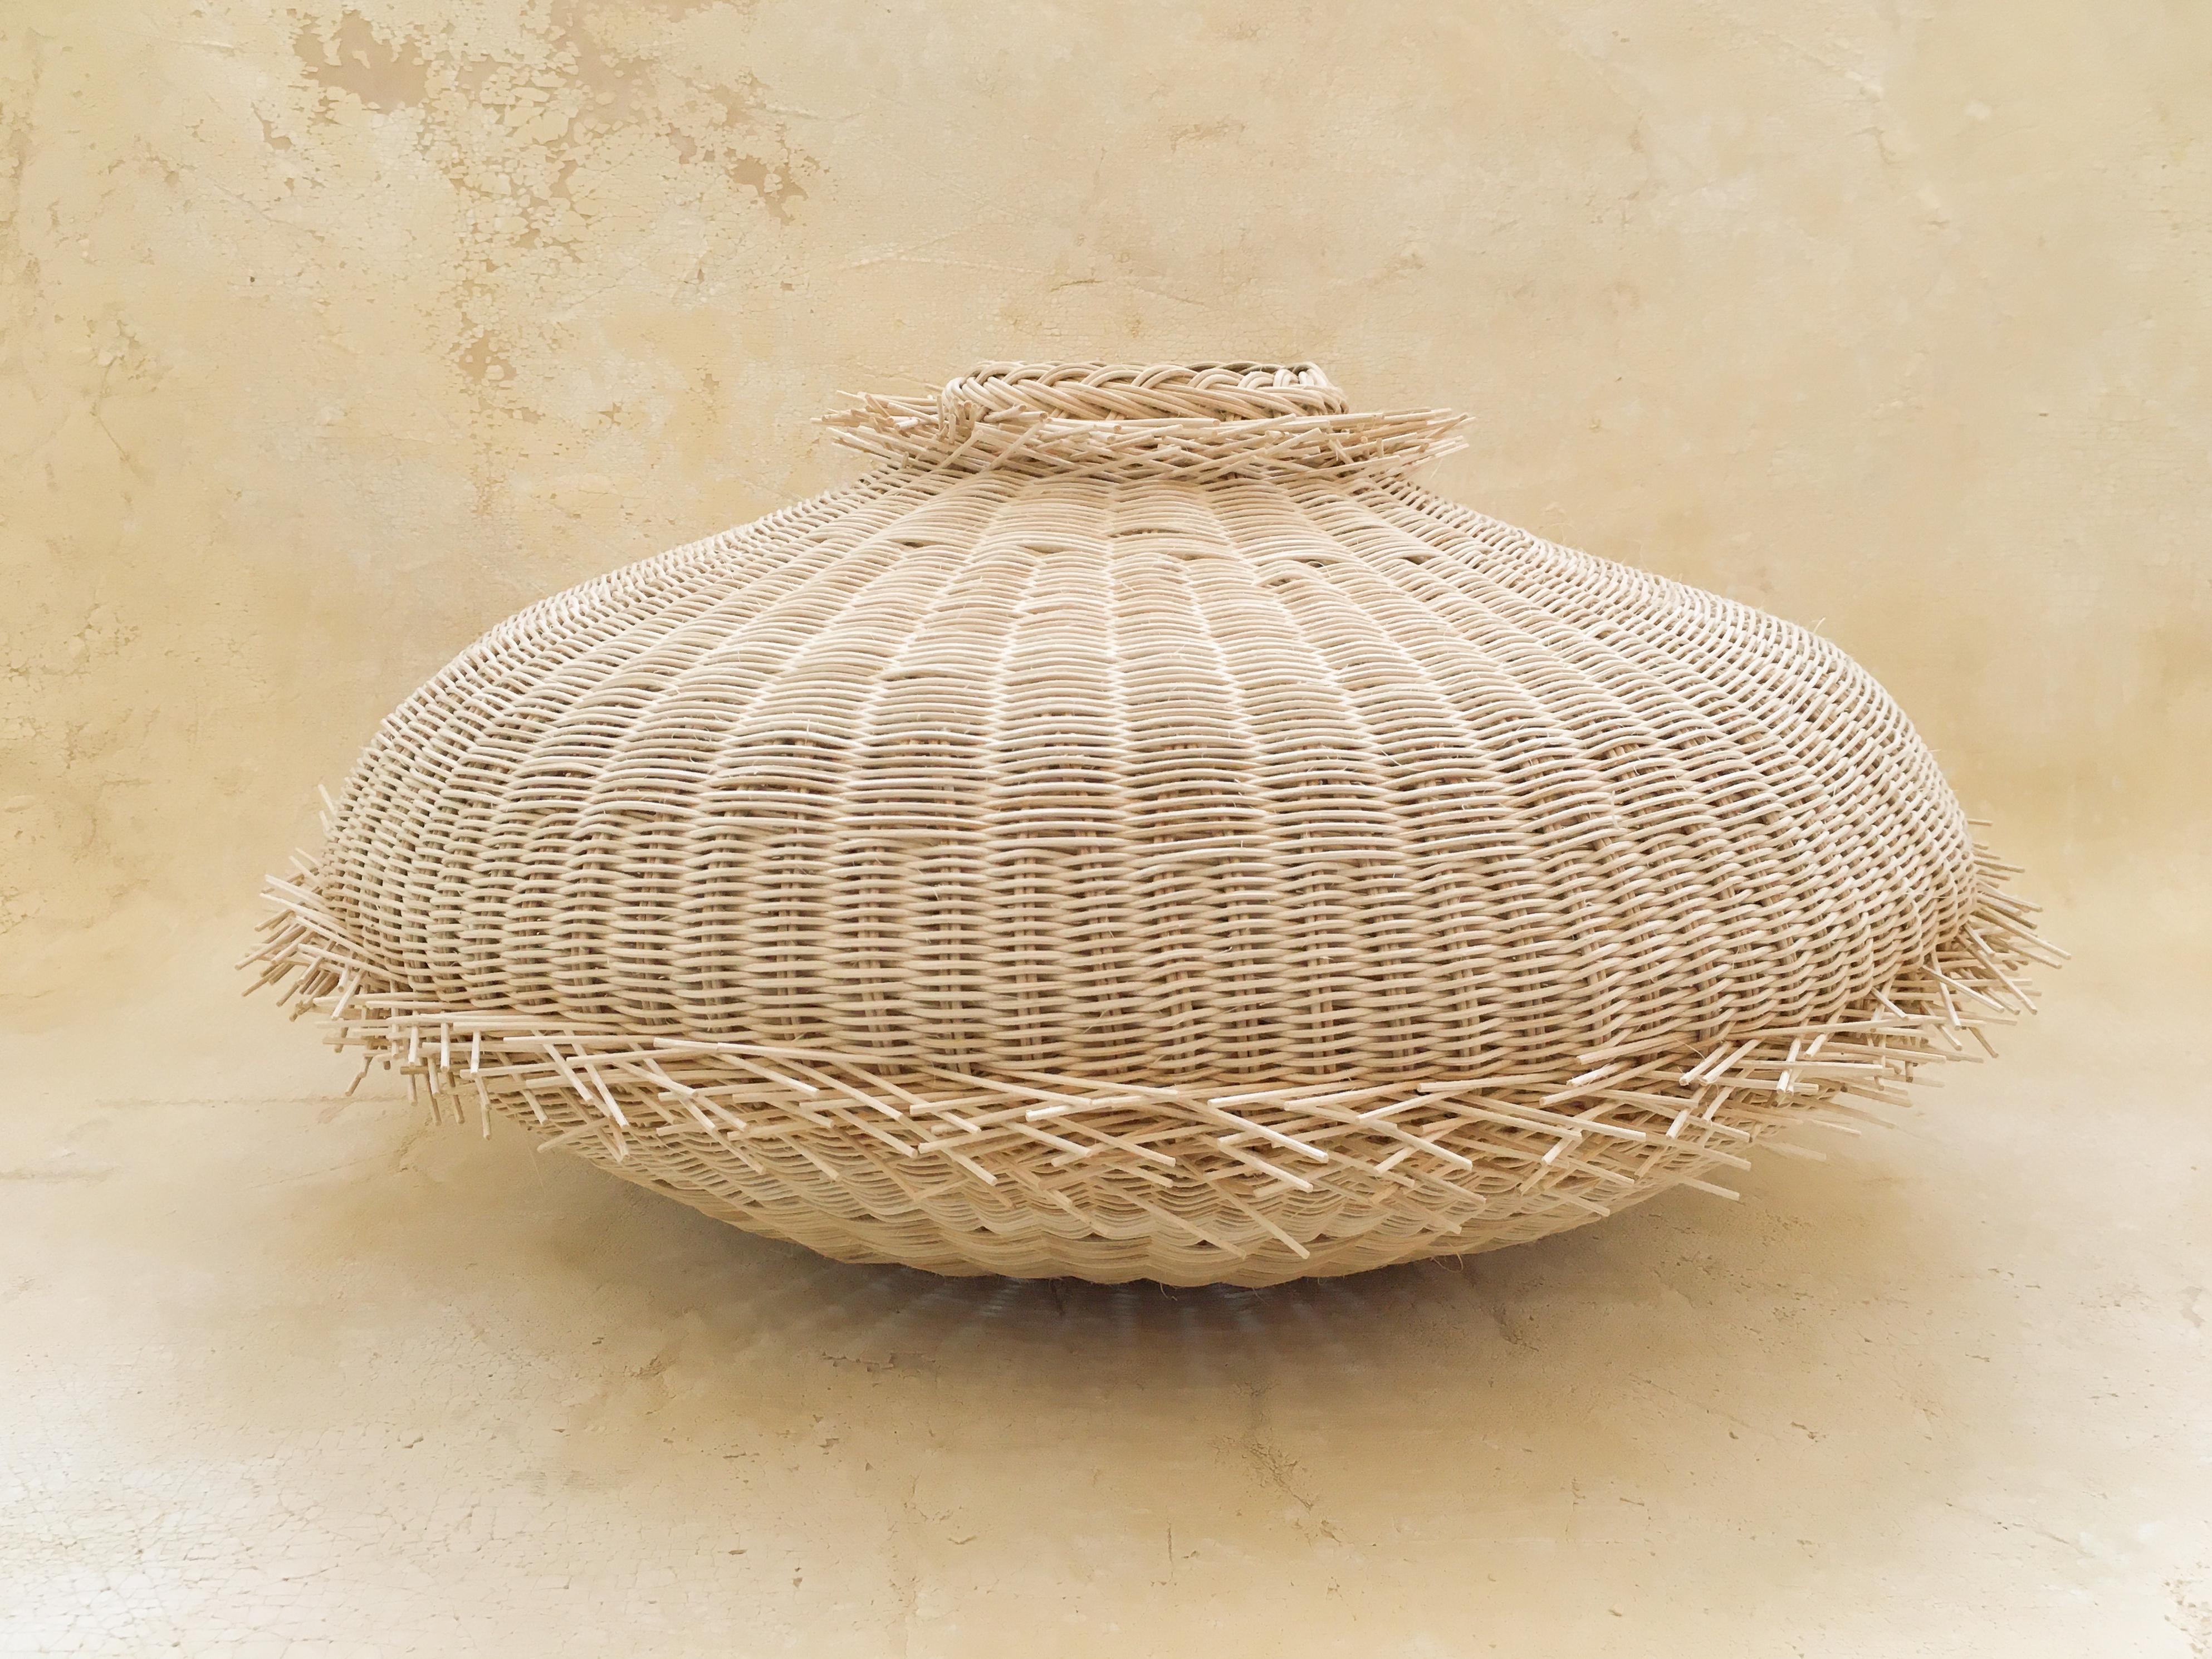 Cesto Erizo by Onora
Dimensions: D 65 x 34 cm
Materials: Woven wicker

Our new on going basket collection explores a sea urchin aesthetic. Handwoven by master weavers from the State of Mexico.

We are a Mexican brand dedicated to the creation